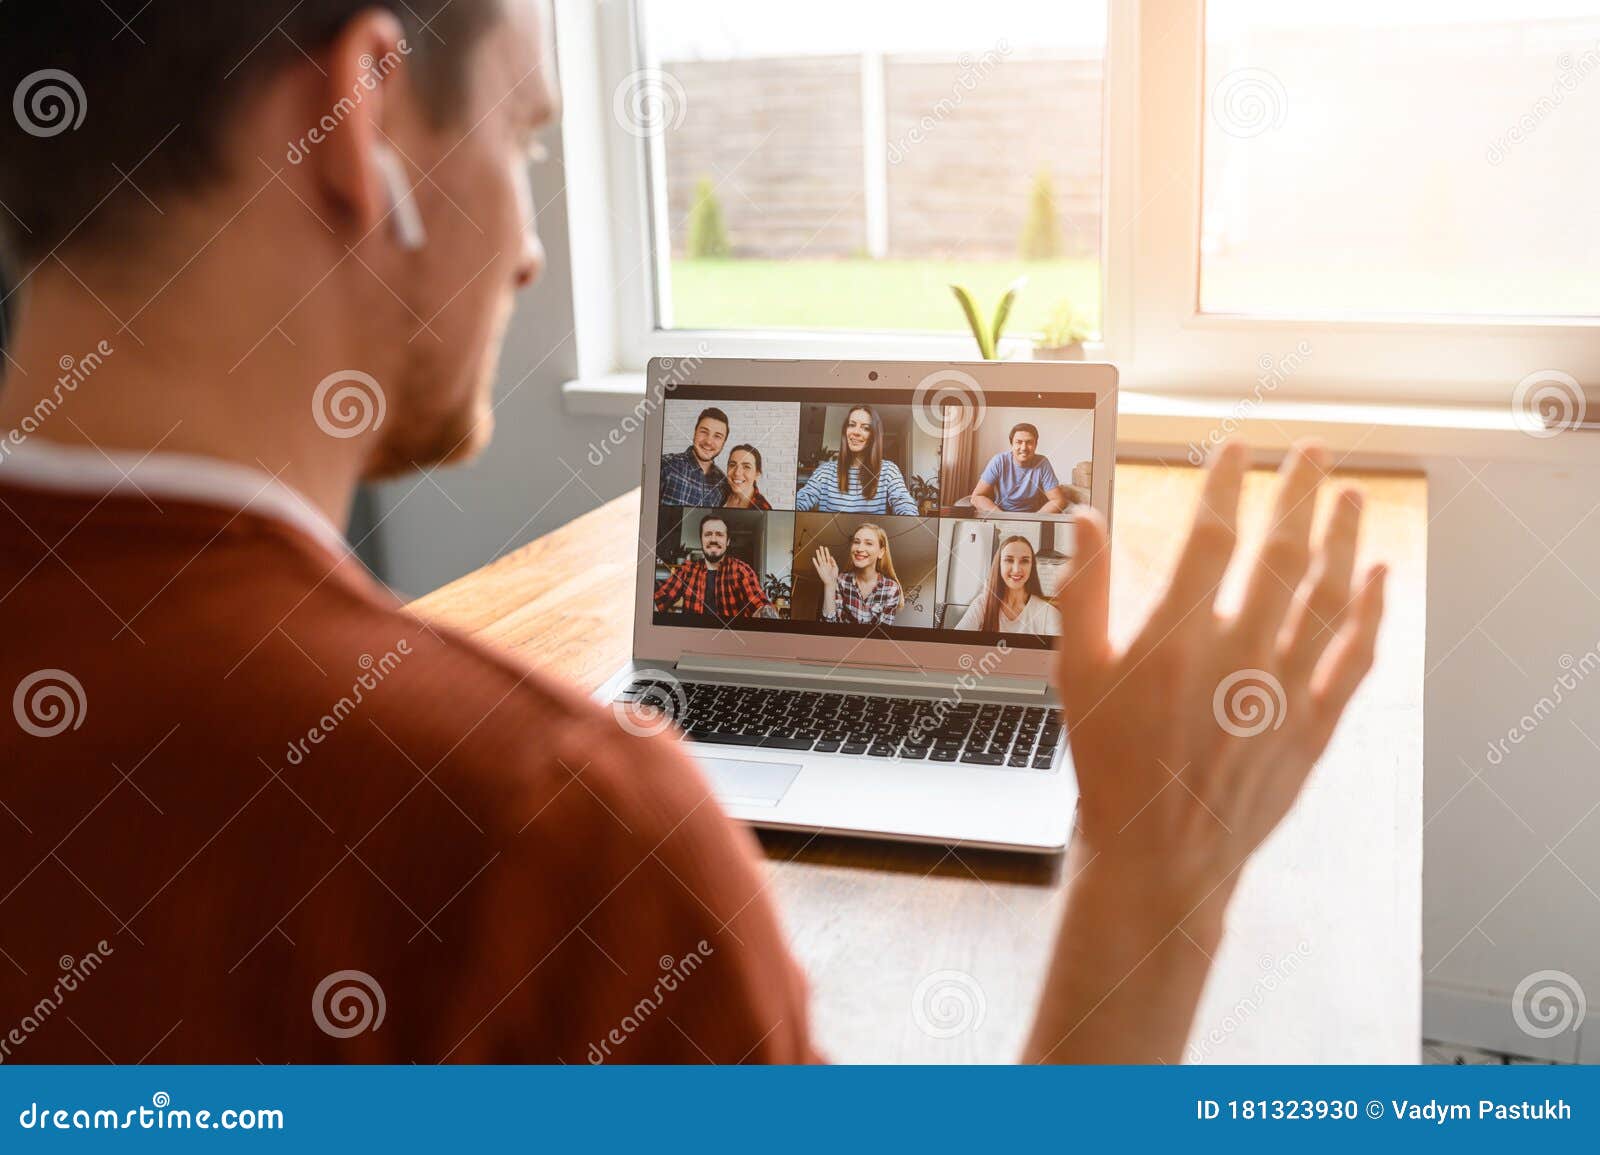 a guy is using laptop for video call, zoom